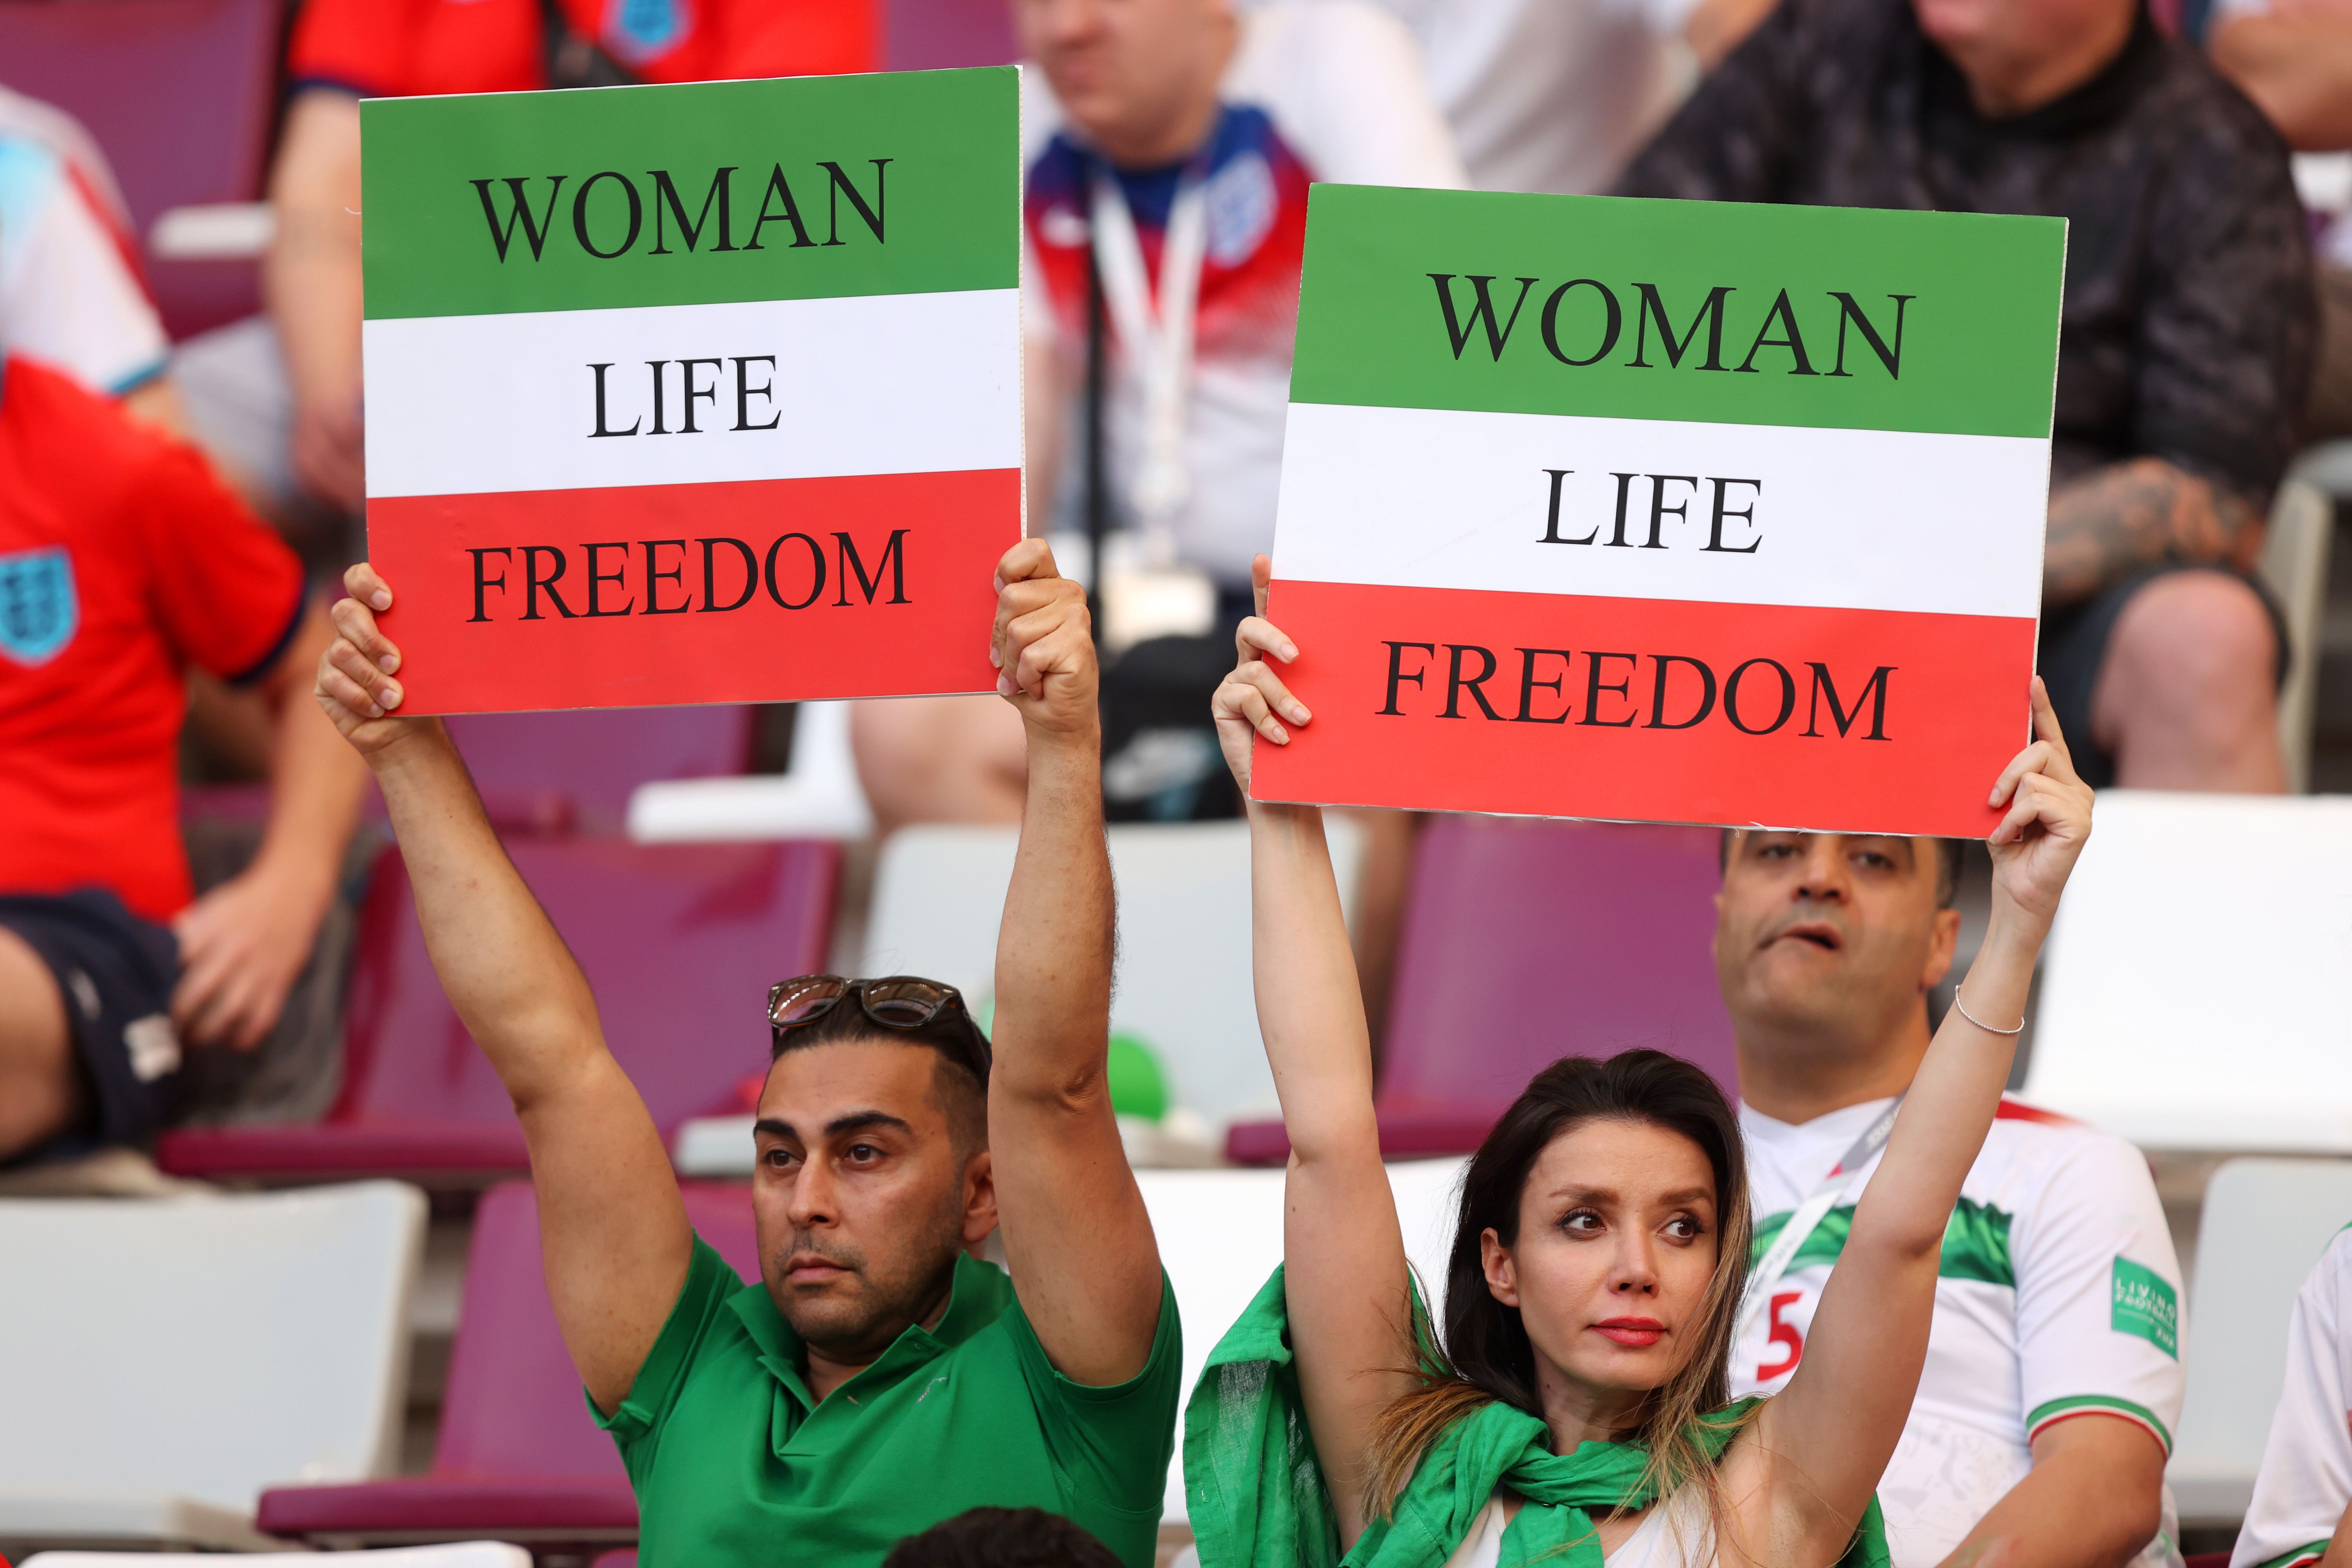 Iranian fans hold up signs advocating for women's rights at the 2022 World Cup